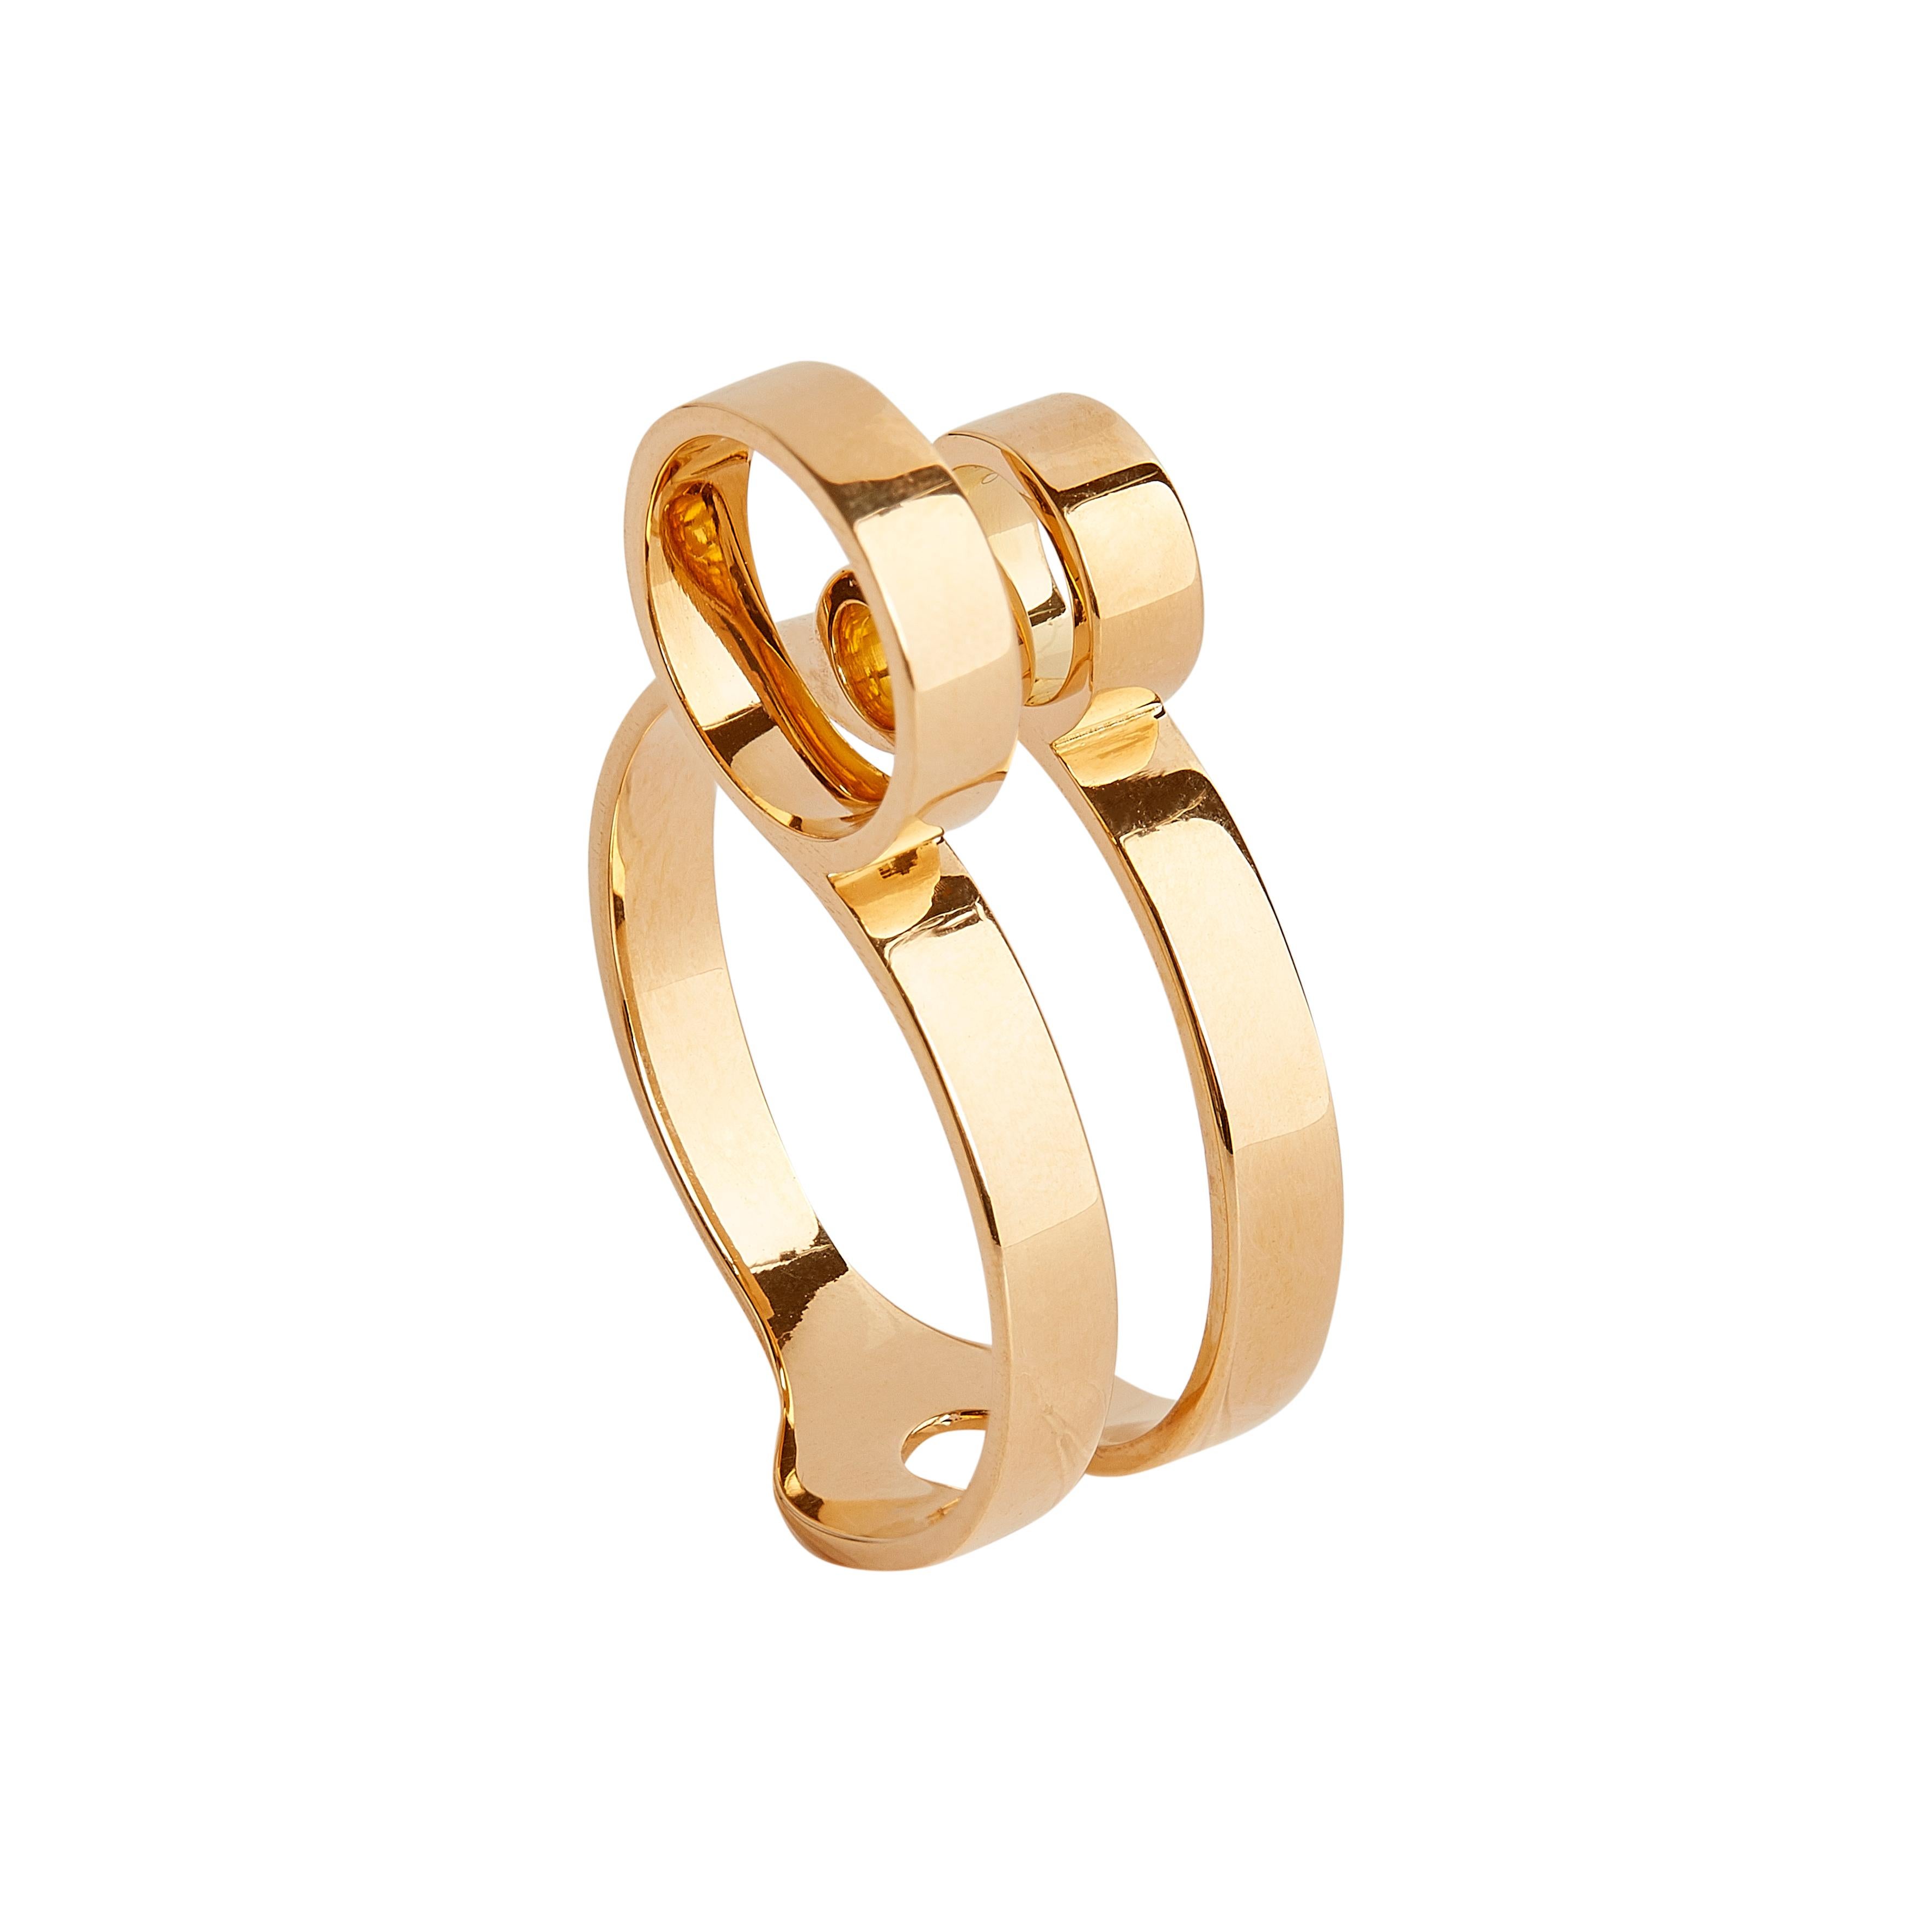 Made by hand in Nathalie Jean Milan's studio, Ambika 3 Ring is in 18 karat rosé gold, a warm, sophisticated color close to yellow gold. Carefully proportioned circles folding cleverly on one another and simply juxtaposed compose this playful